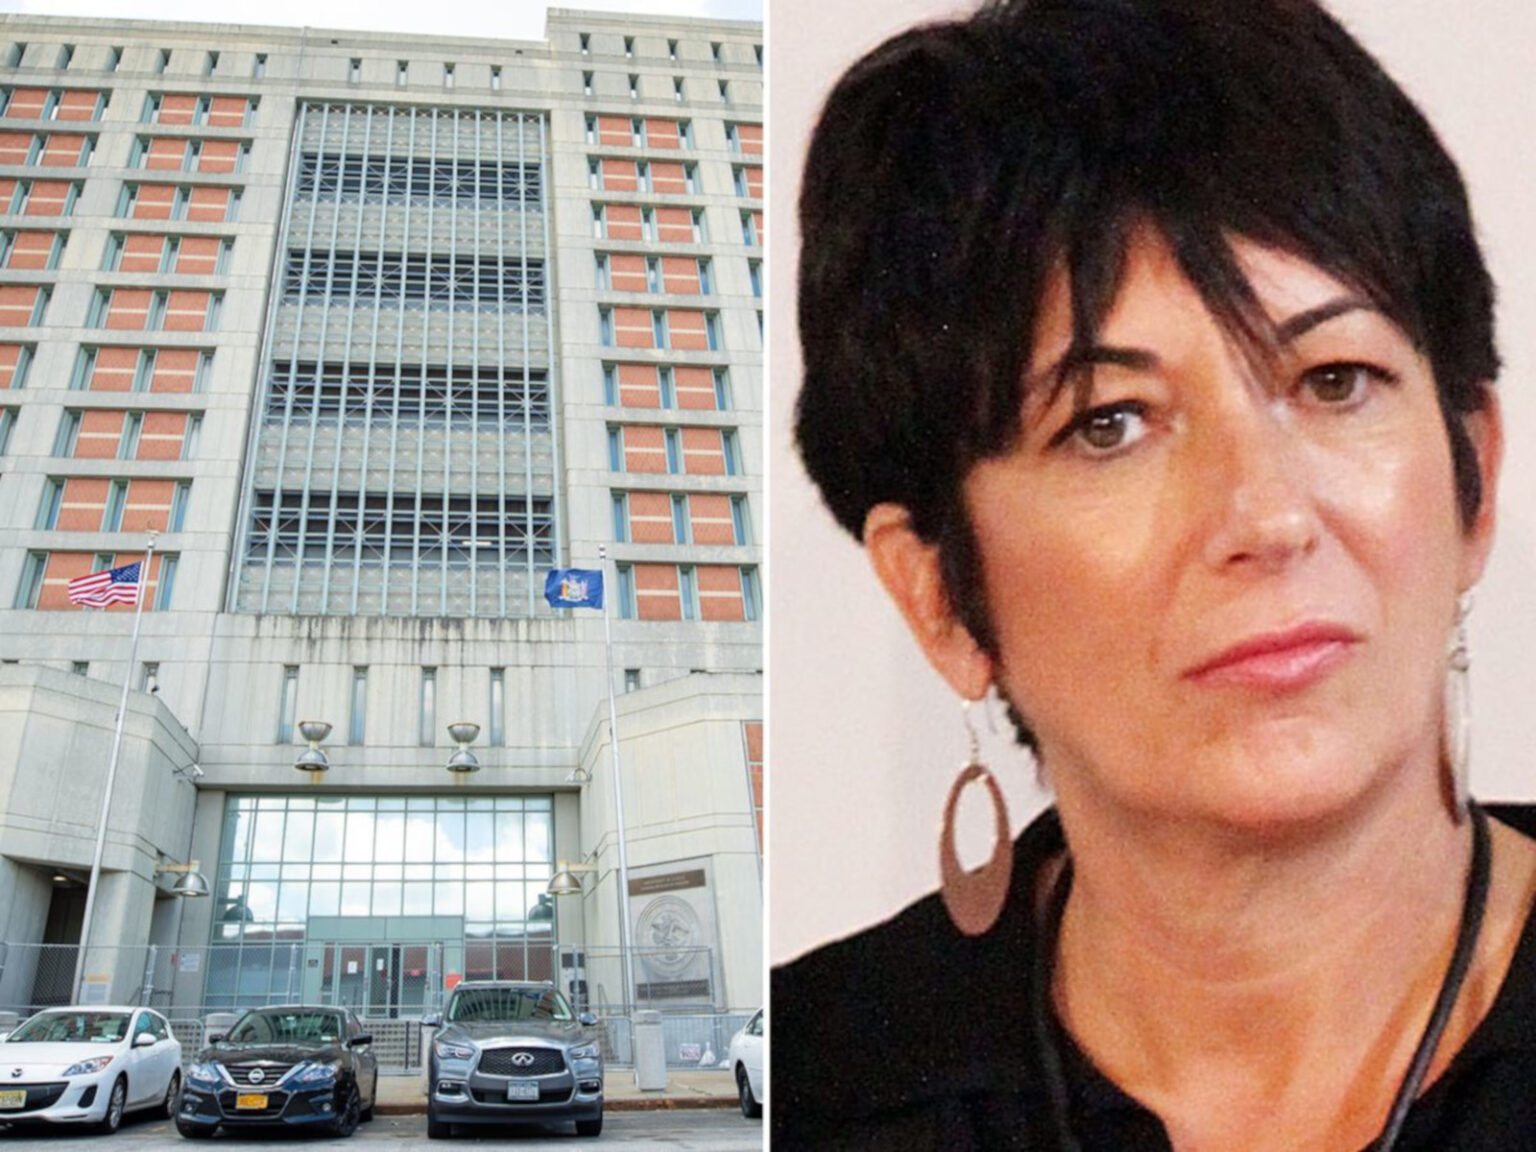 Ghislaine Maxwell is still complaining about her time awaiting trial in the Metropolitan Detention Center. Here's why.